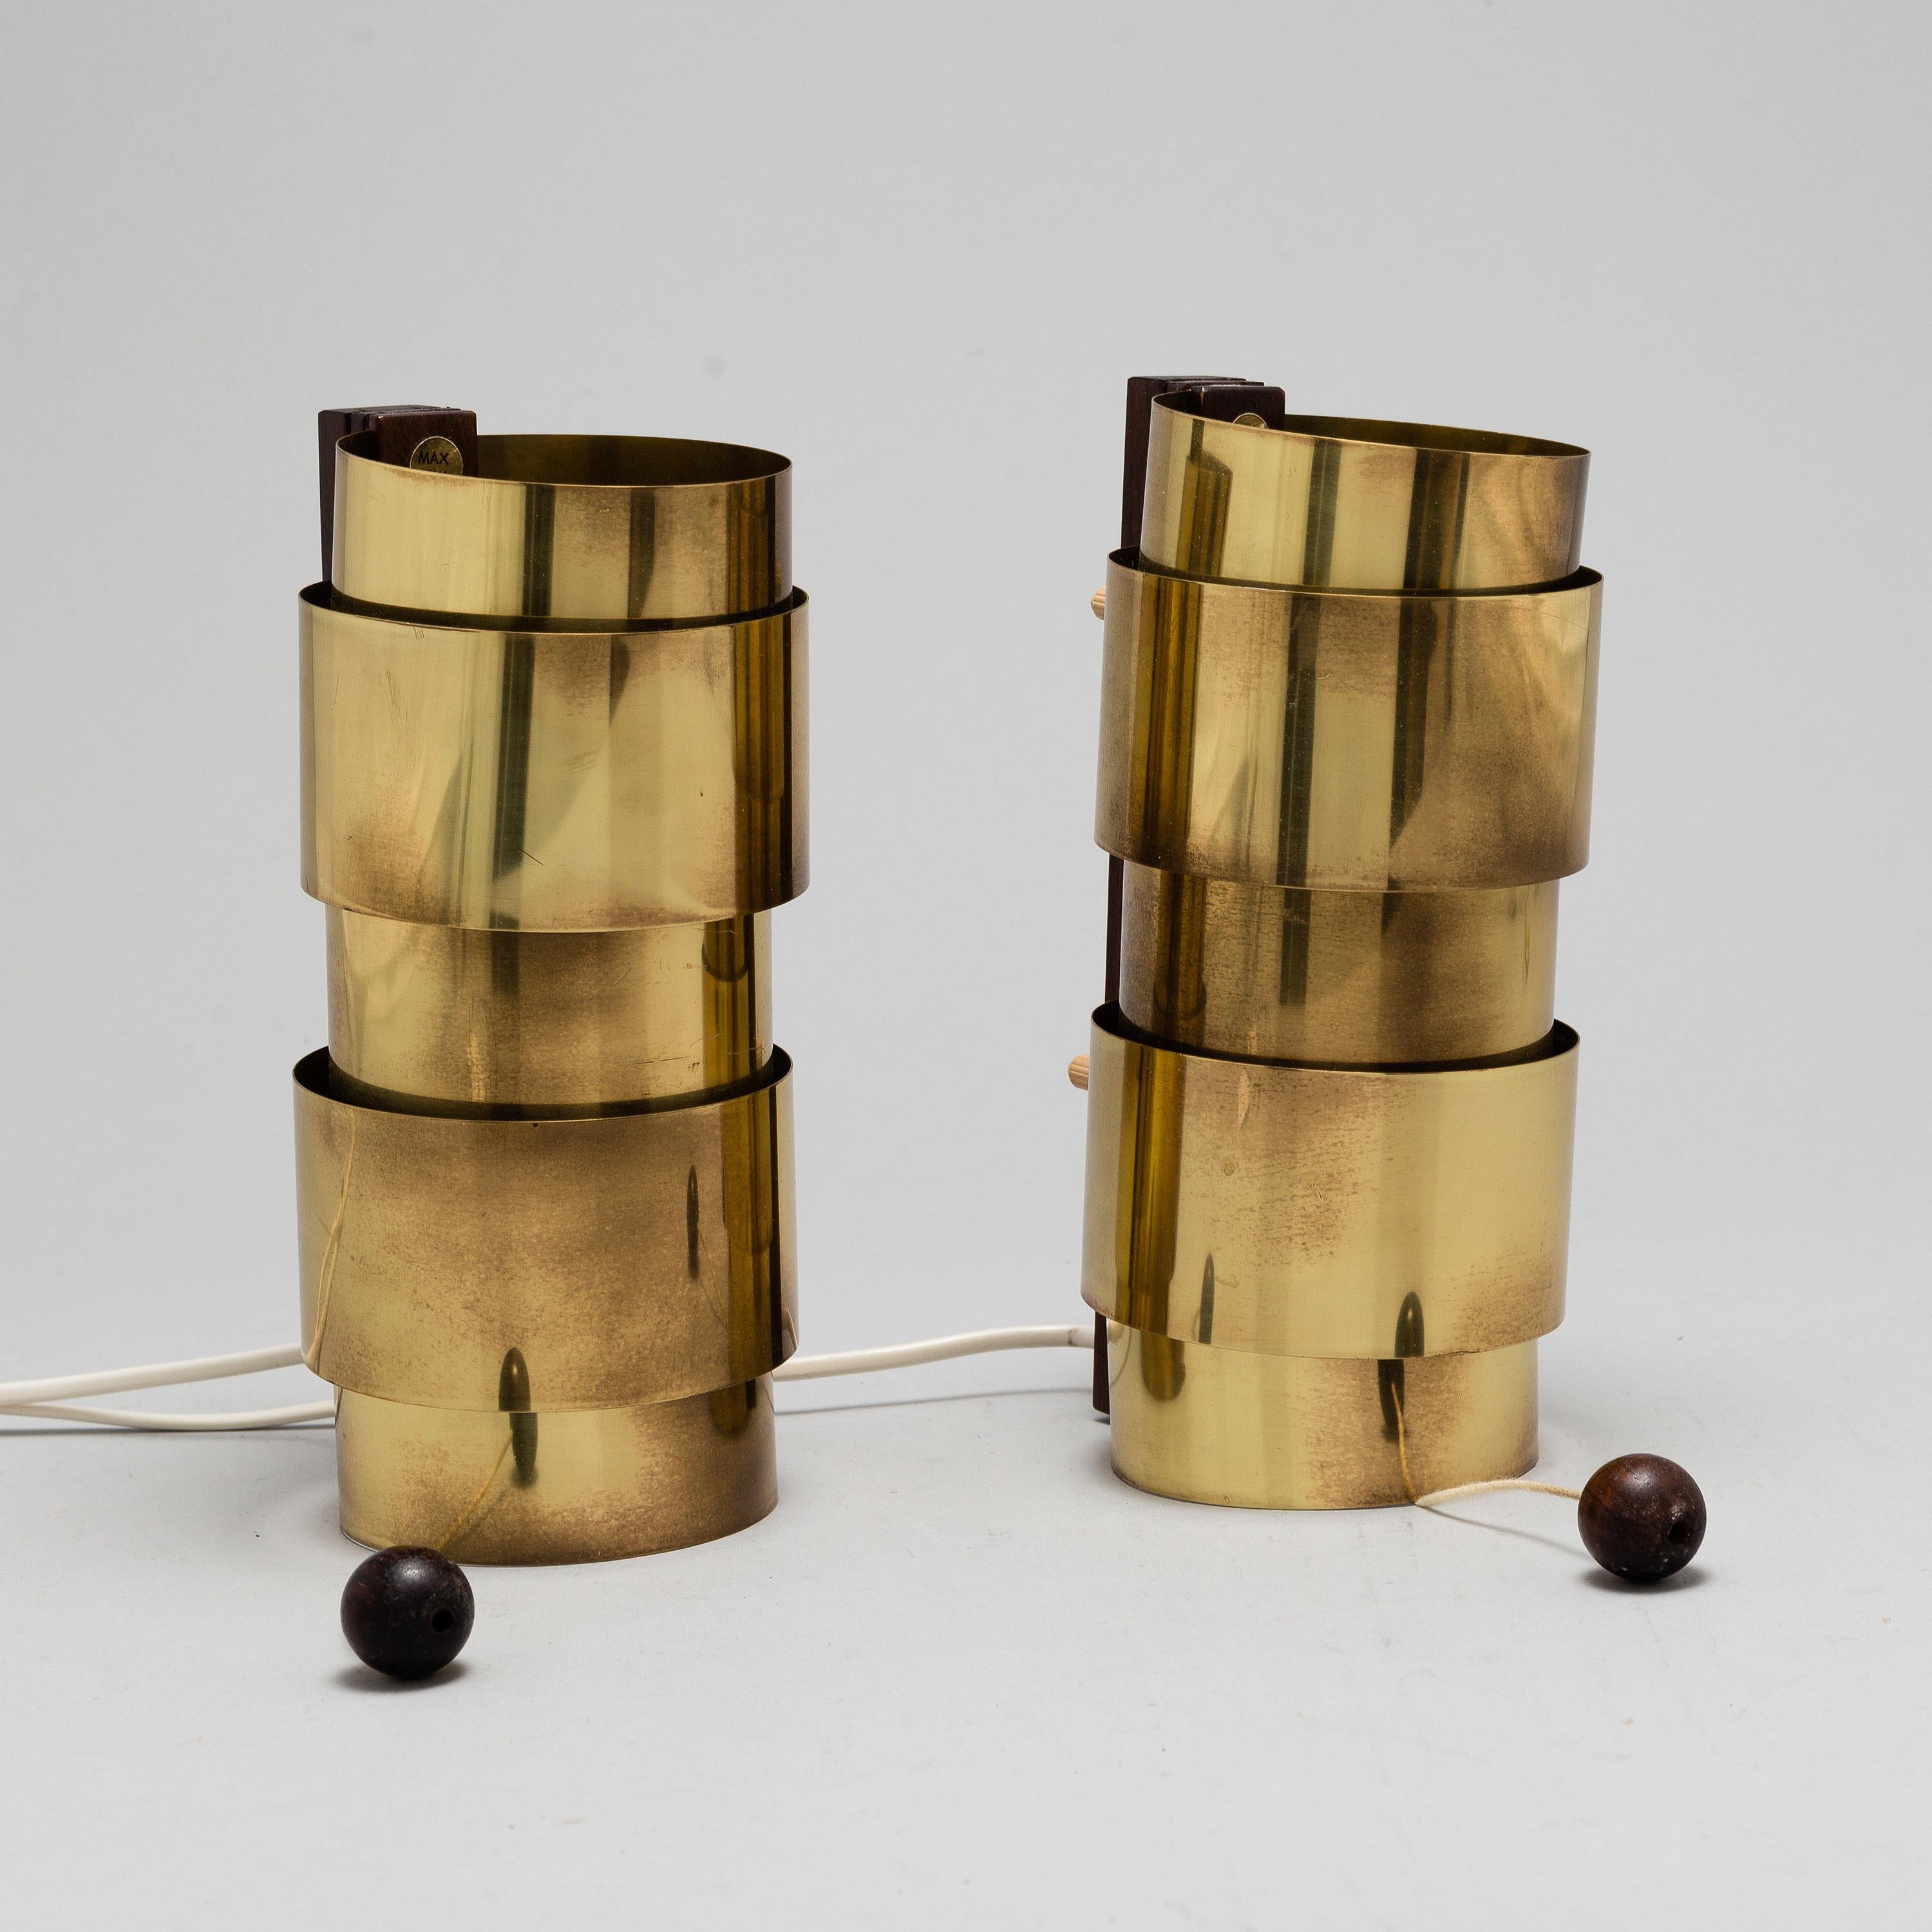 Rare pair of brass and rosewood wall lights by Hans-Agne Jakobsson. Produced by Markaryd, Sweden.
 